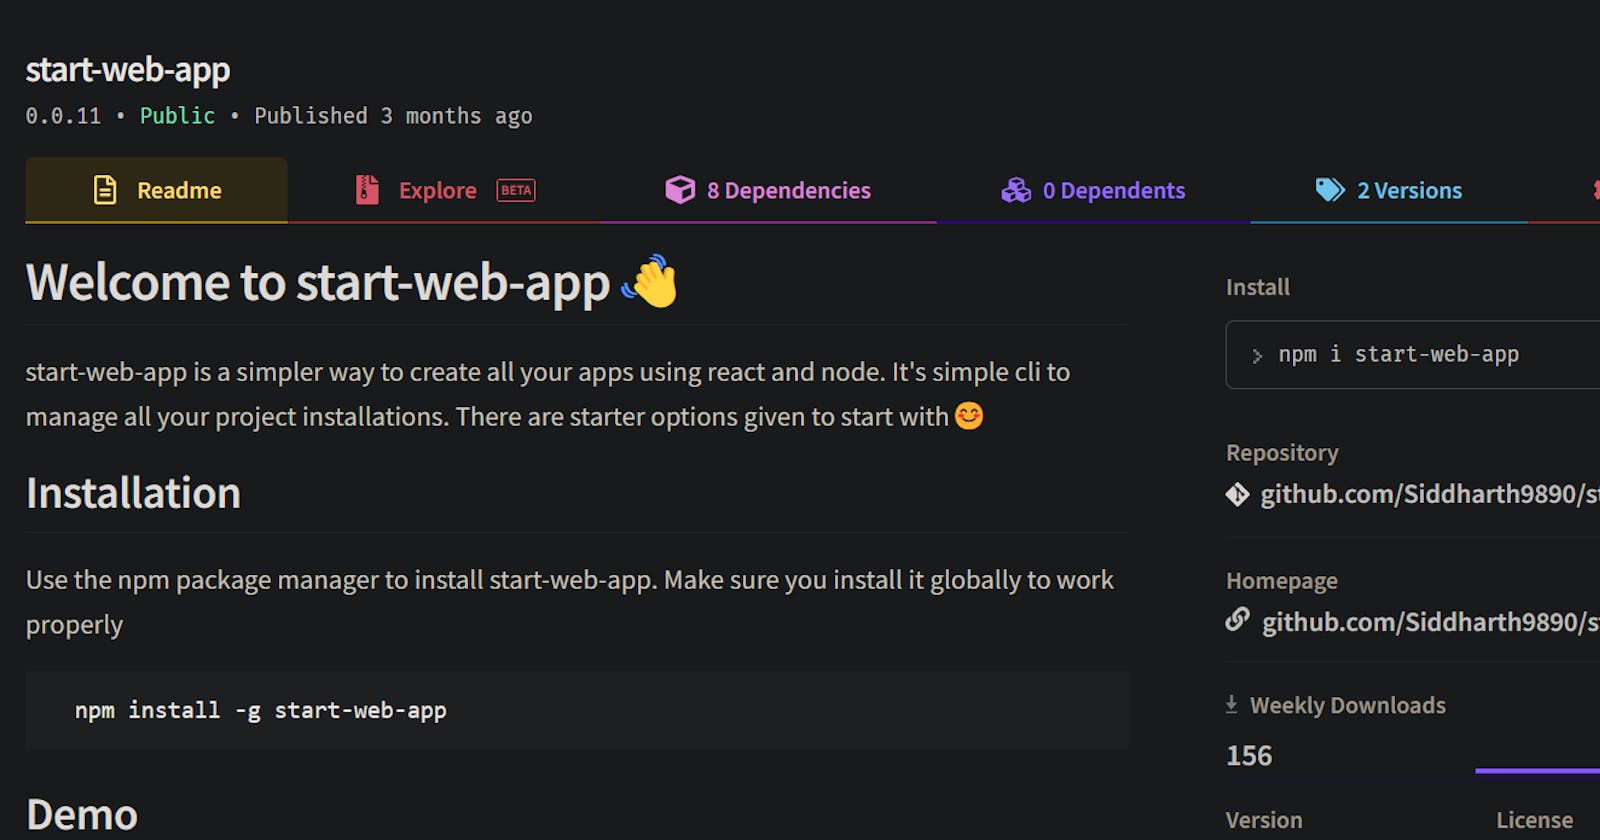 Start-web-app v2.0 You want tailwind support let's get it